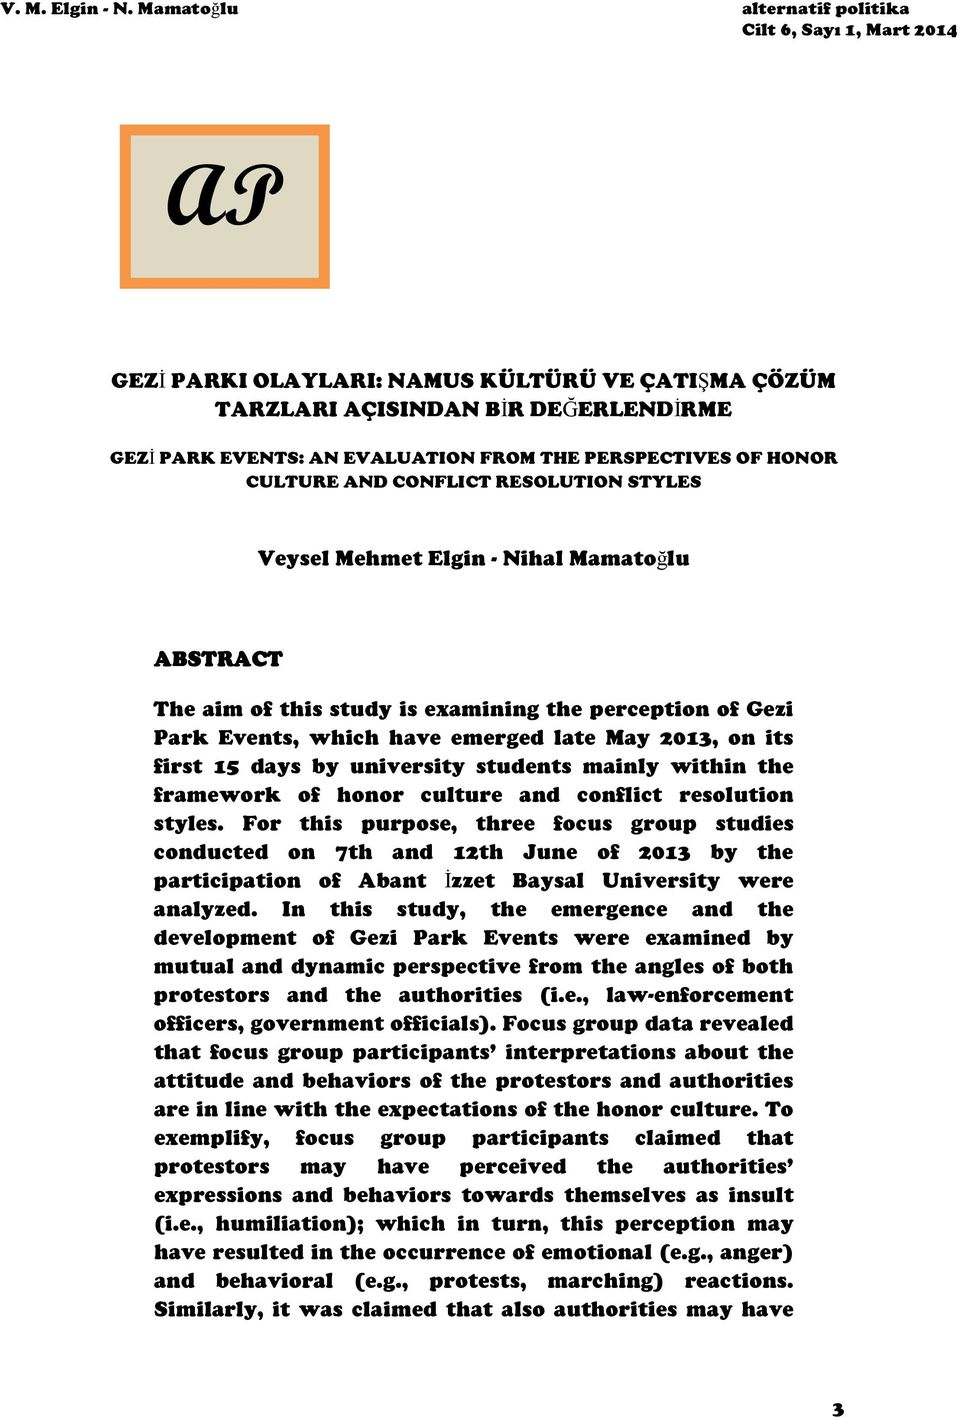 PERSPECTIVES OF HONOR CULTURE AND CONFLICT RESOLUTION STYLES Veysel Mehmet Elgin - Nihal Mamatoğlu ABSTRACT The aim of this study is examining the perception of Gezi Park Events, which have emerged